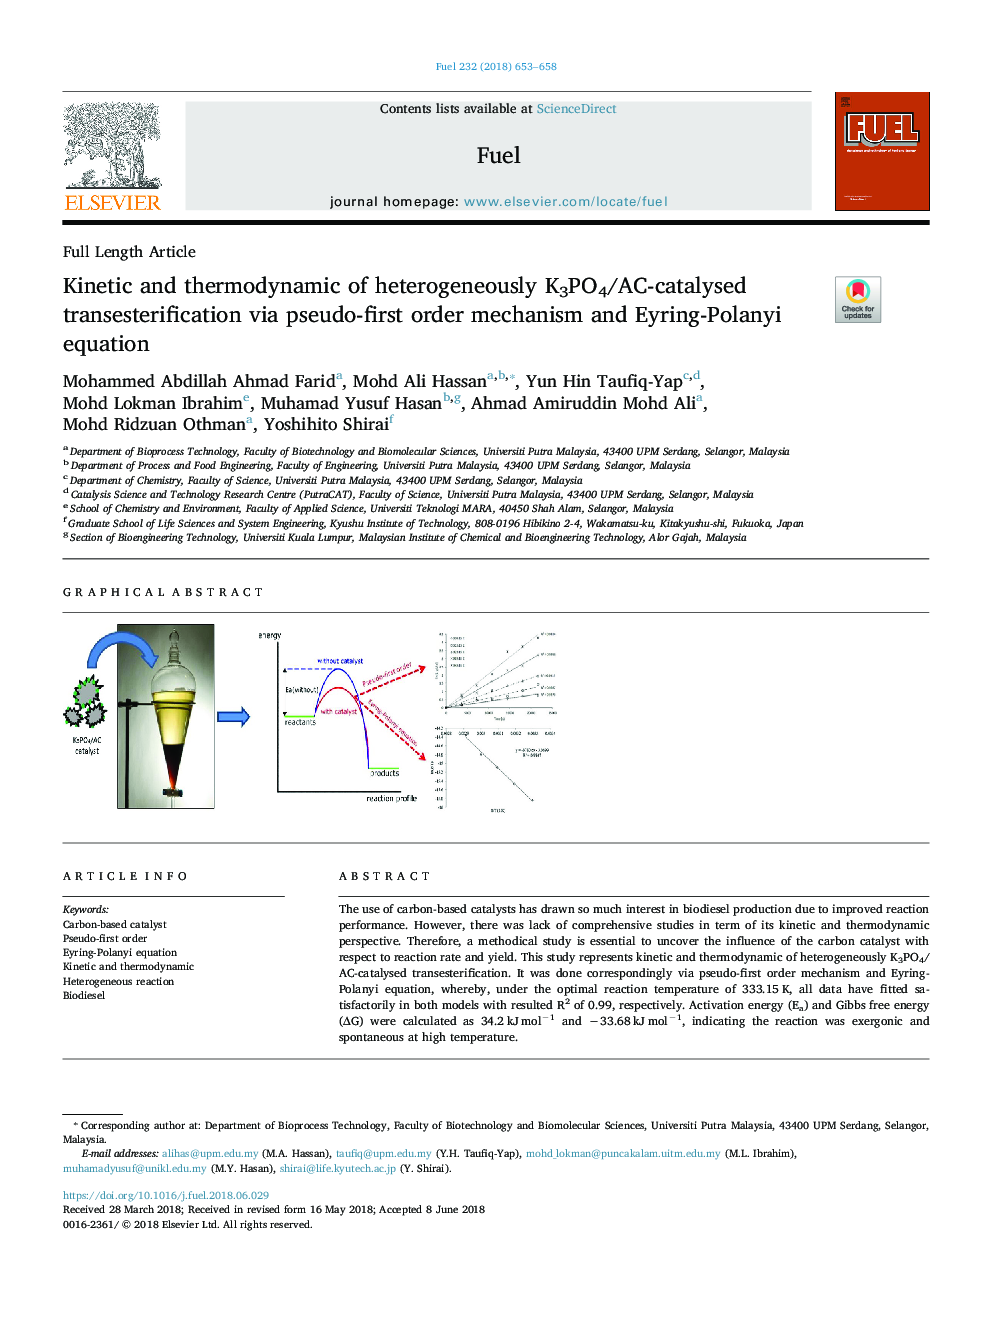 Kinetic and thermodynamic of heterogeneously K3PO4/AC-catalysed transesterification via pseudo-first order mechanism and Eyring-Polanyi equation